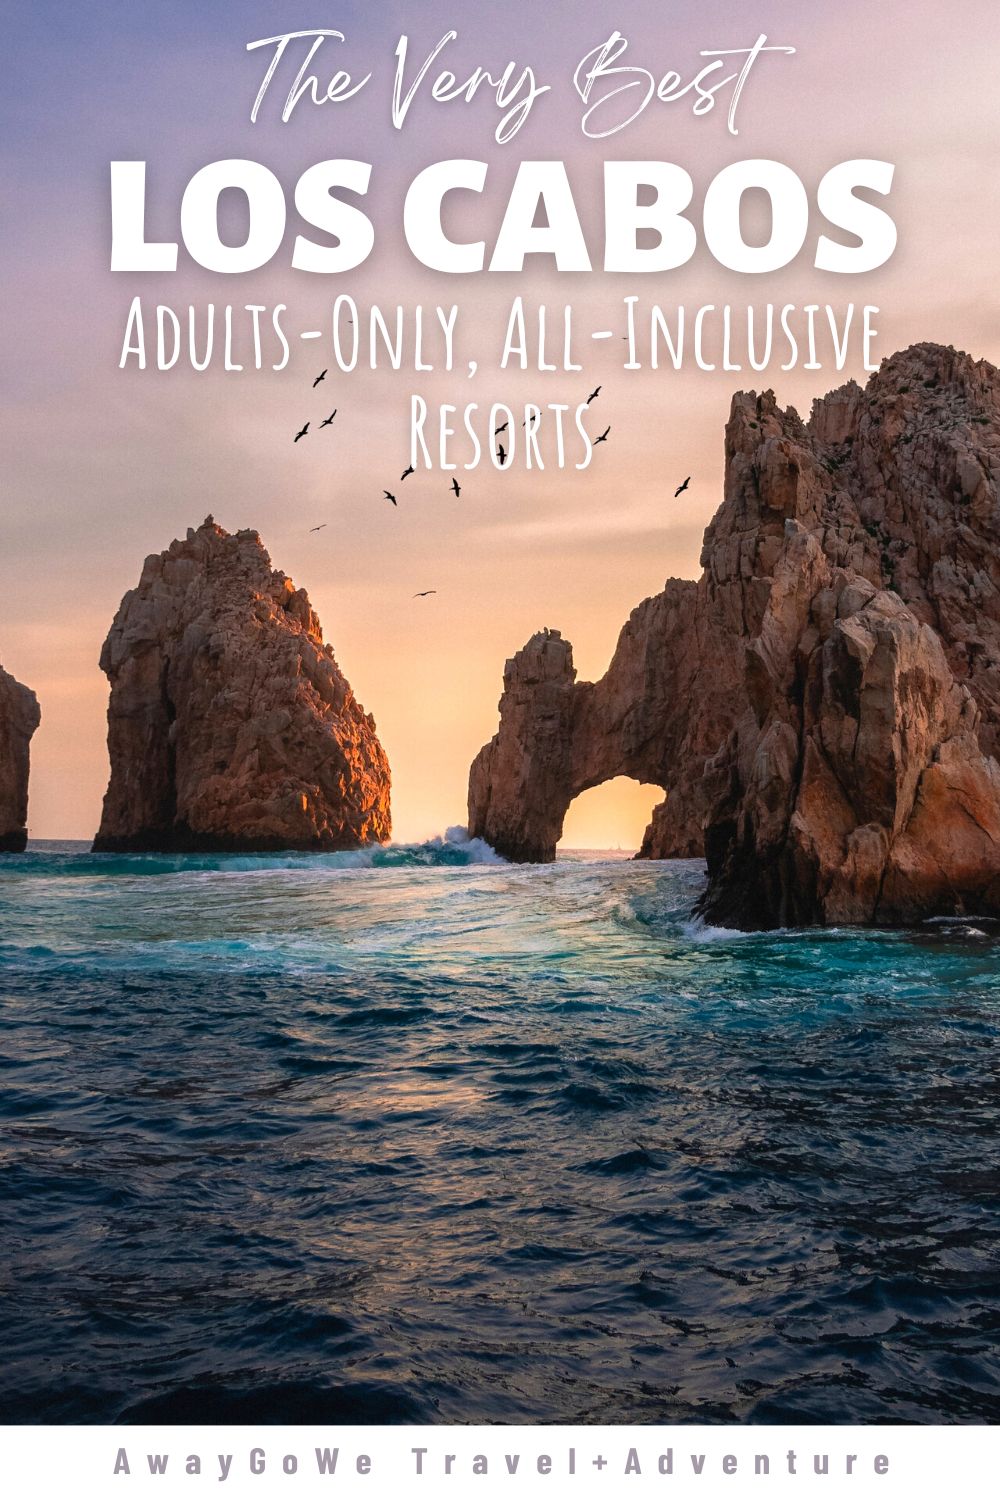 Cabo adults-only all-inclusive resorts